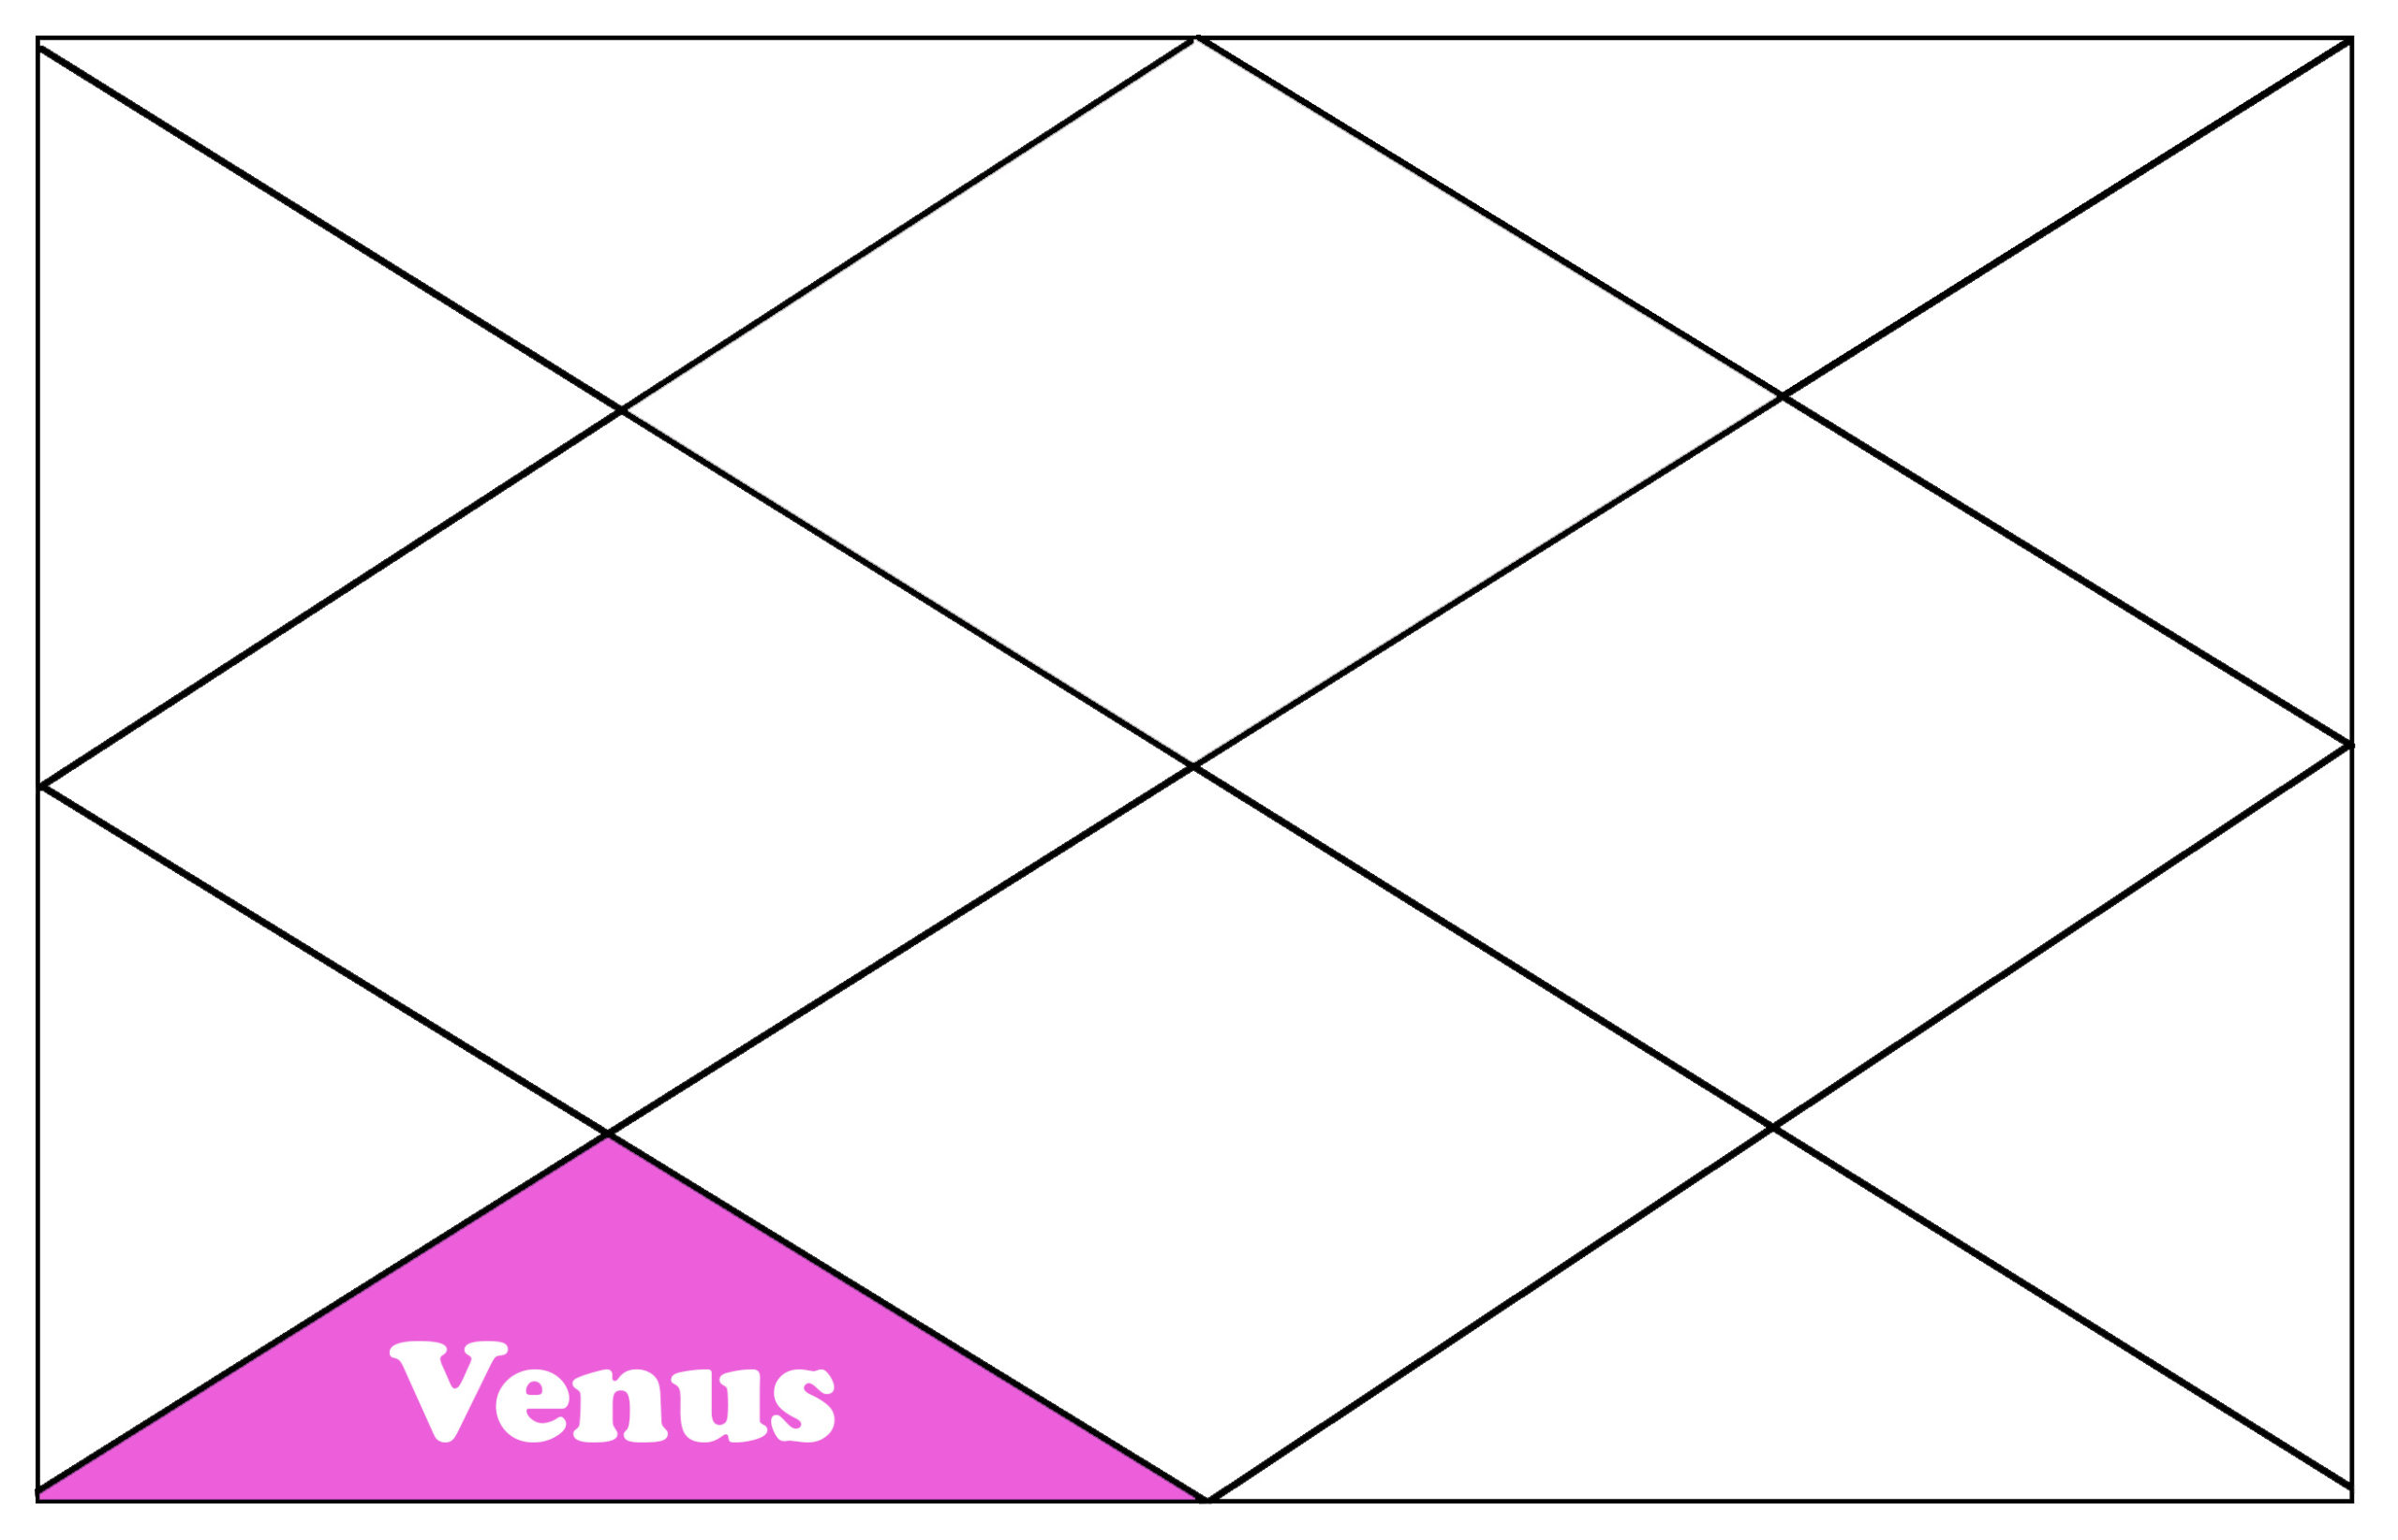 Venus in the 6th house